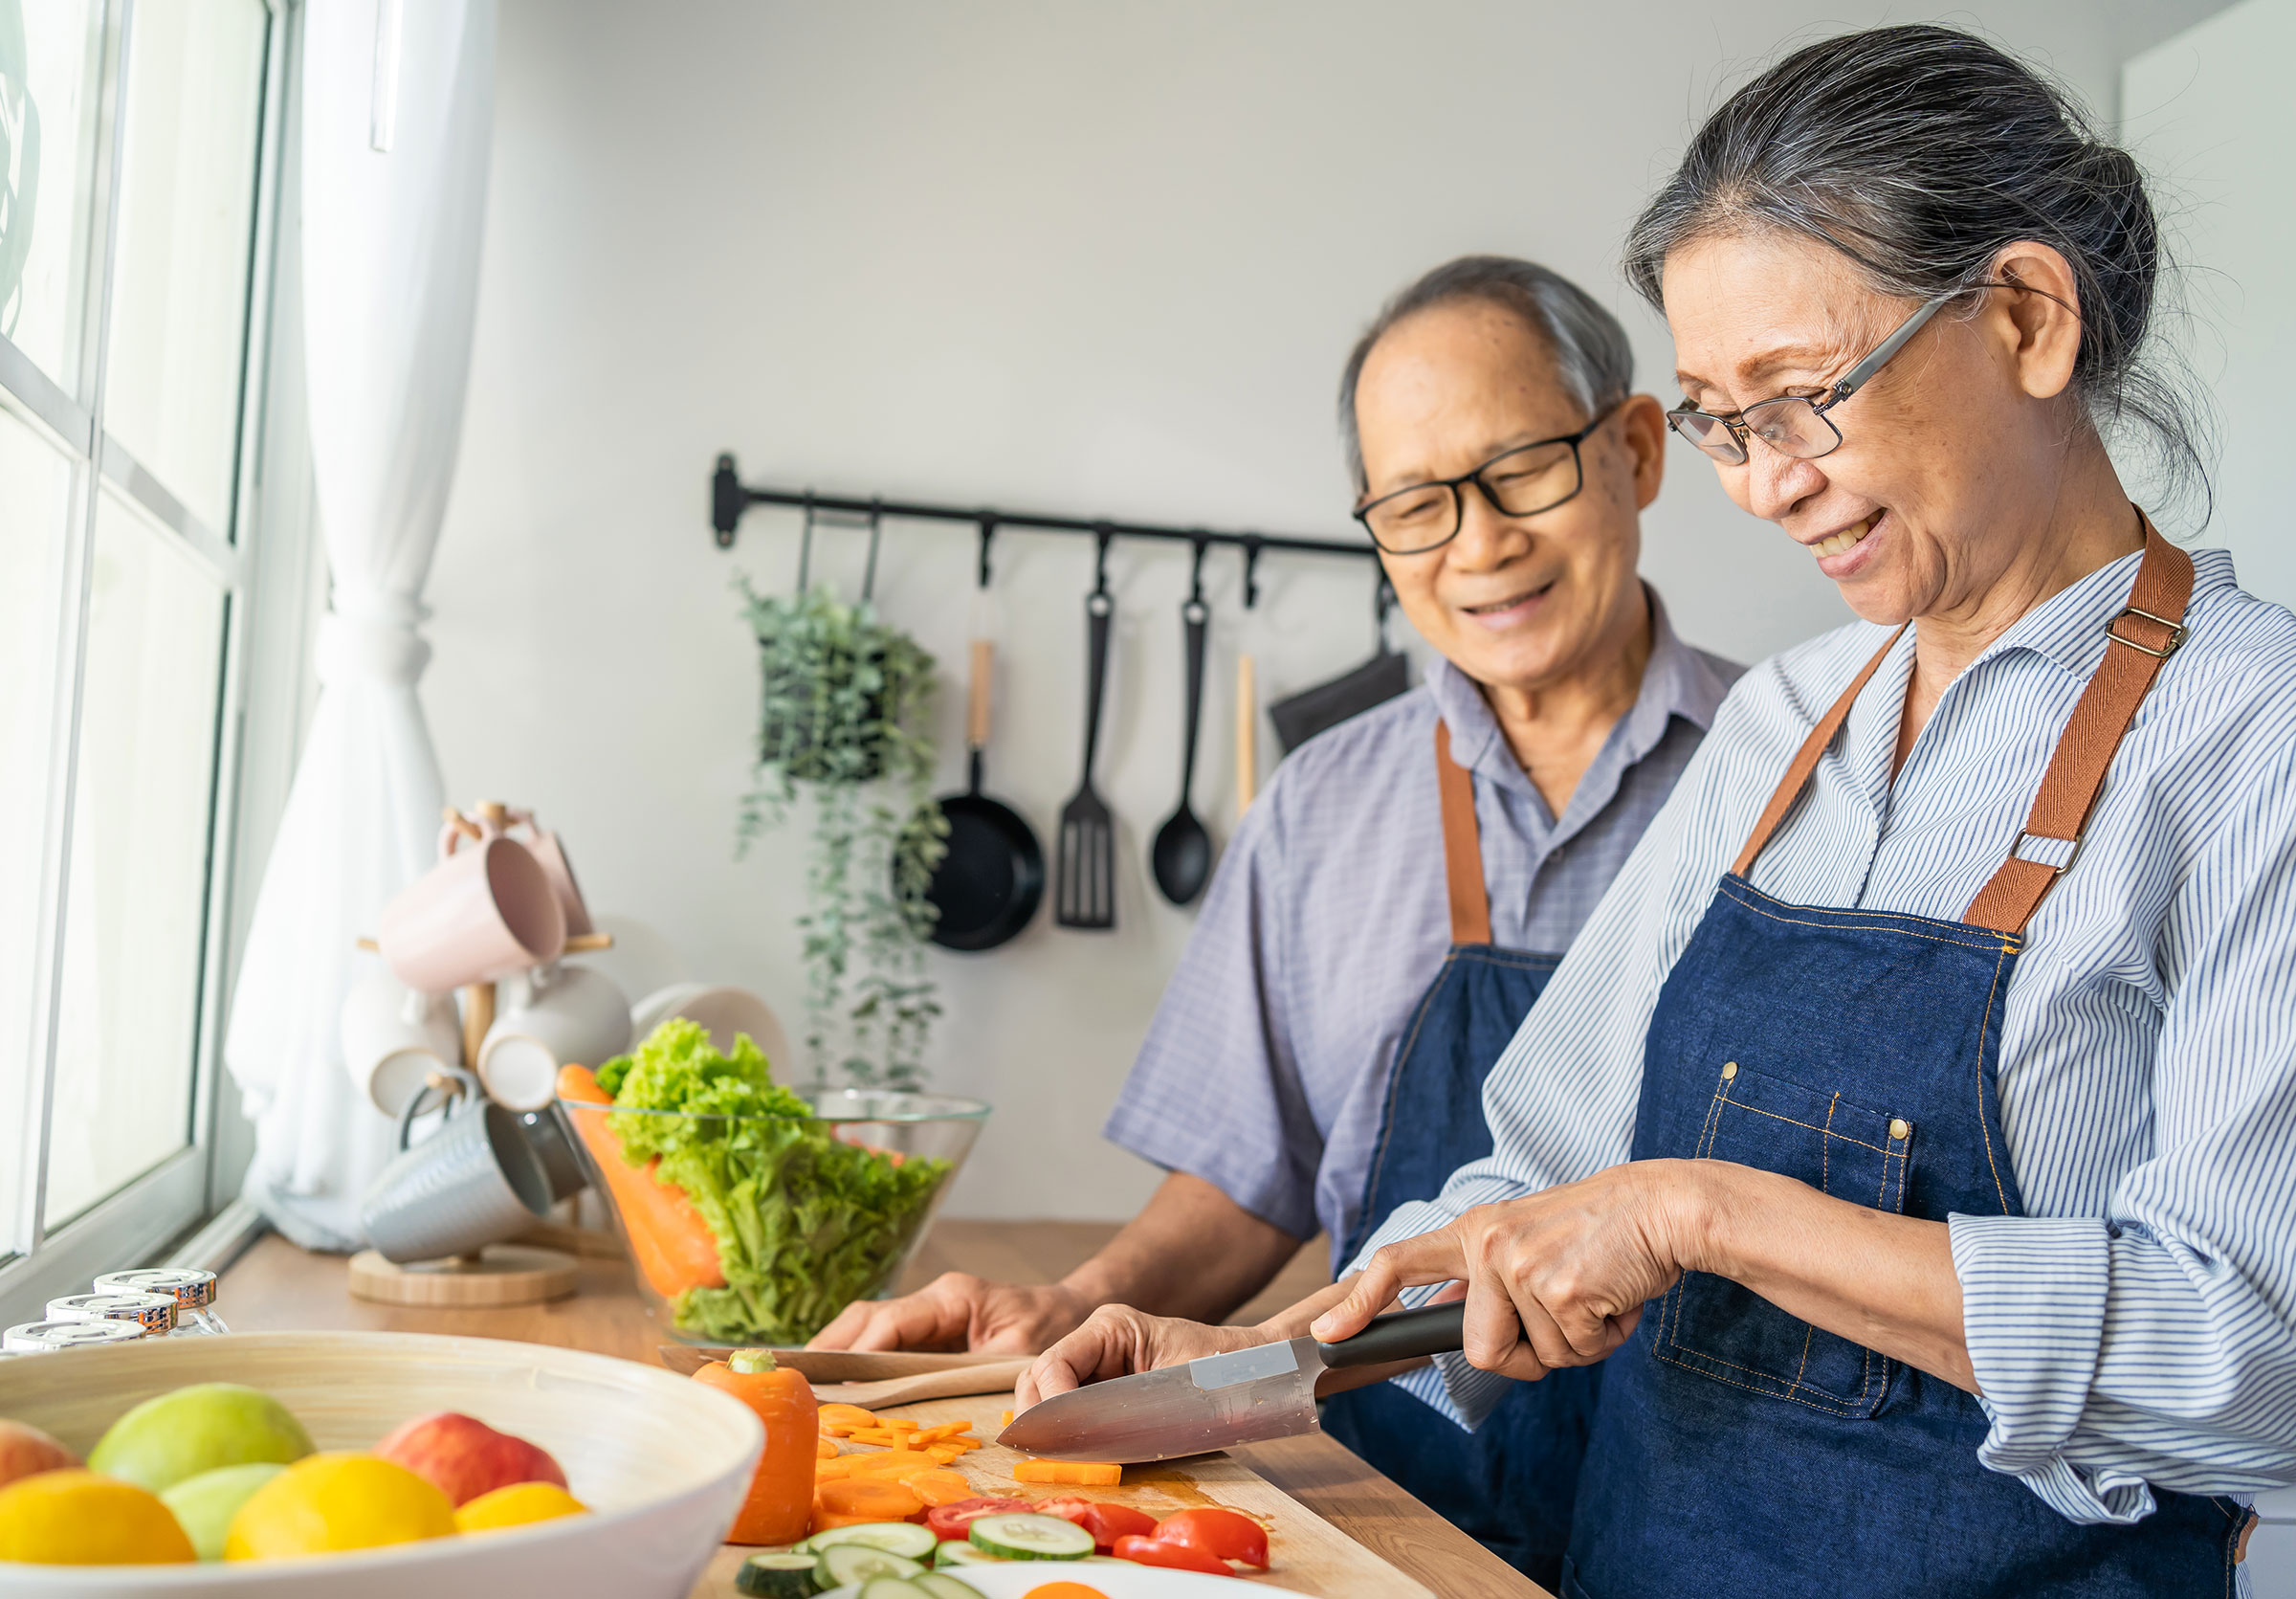 A smiling retired couple stand at a kitchen counter, each wearing an apron. The woman is holding a knife and cutting vegetables.